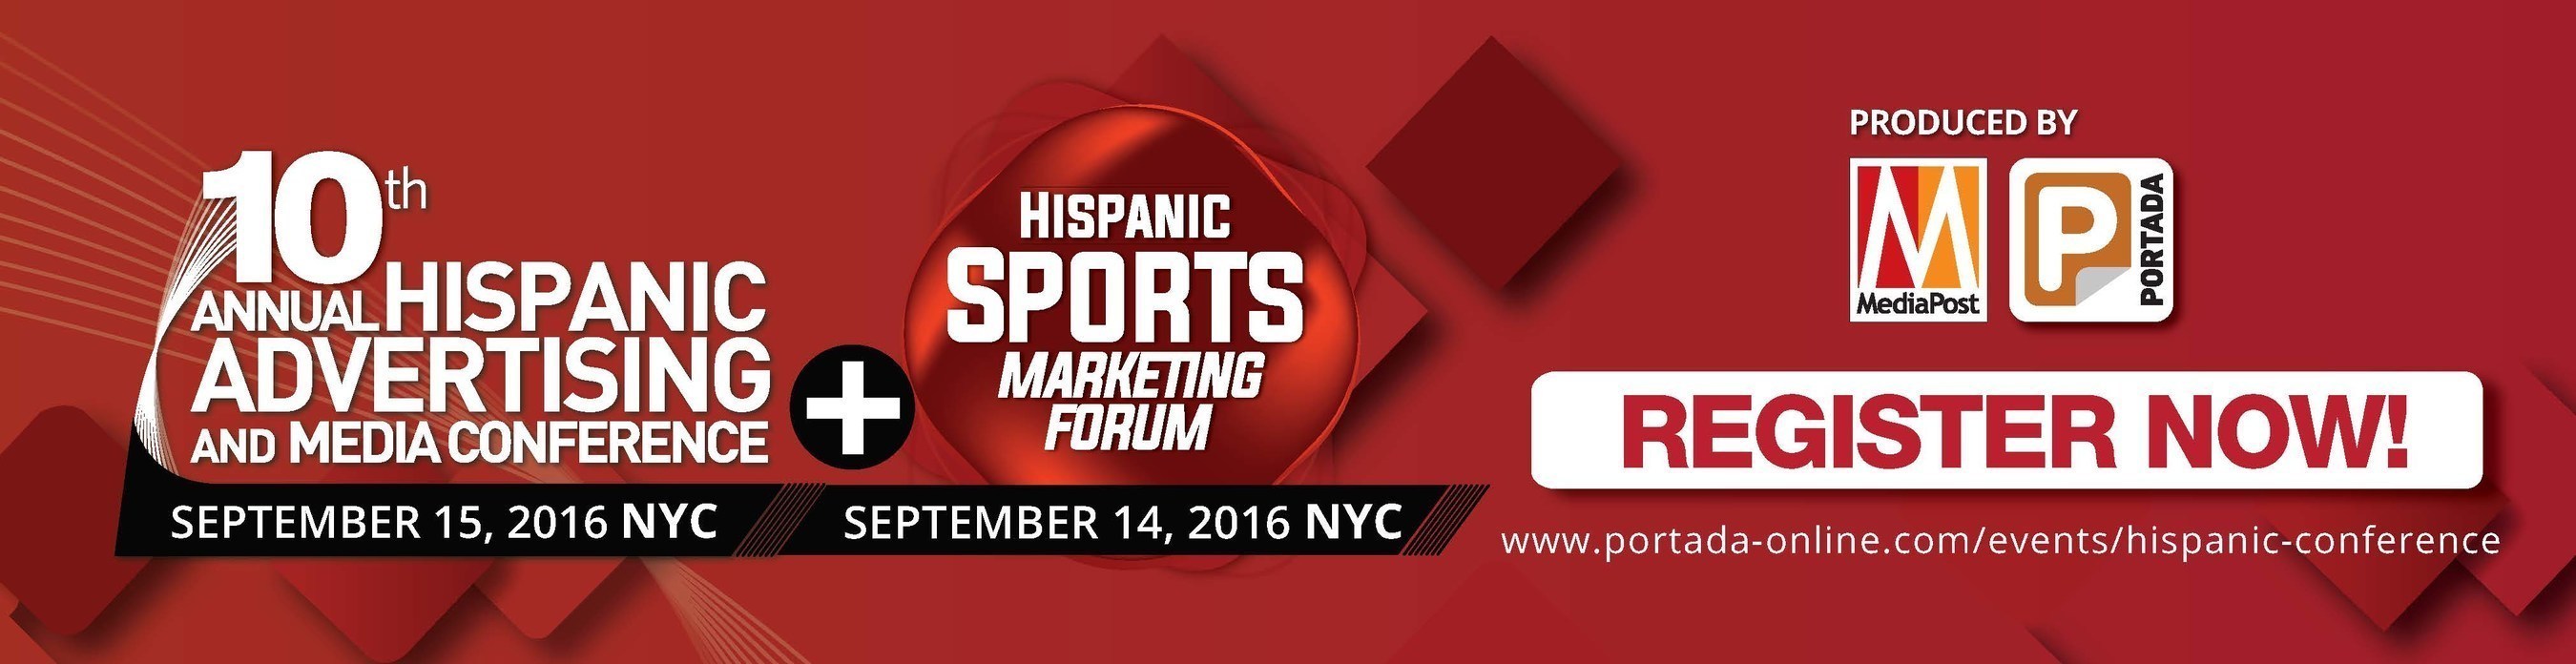 Join us as we celebrate 10 years of excellence on Sept. 15 at the 10th Annual Hispanic Advertising and Media Conference, the pre-eminent event for Hispanic and Multicultural marketers will be preceded by the Hispanic Sports Marketing Forum on Sept.14. MediaPost and Portada are renowned for connecting the best minds in multicultural marketing, media and tech to discuss the latest trends and changes in the marketplace.